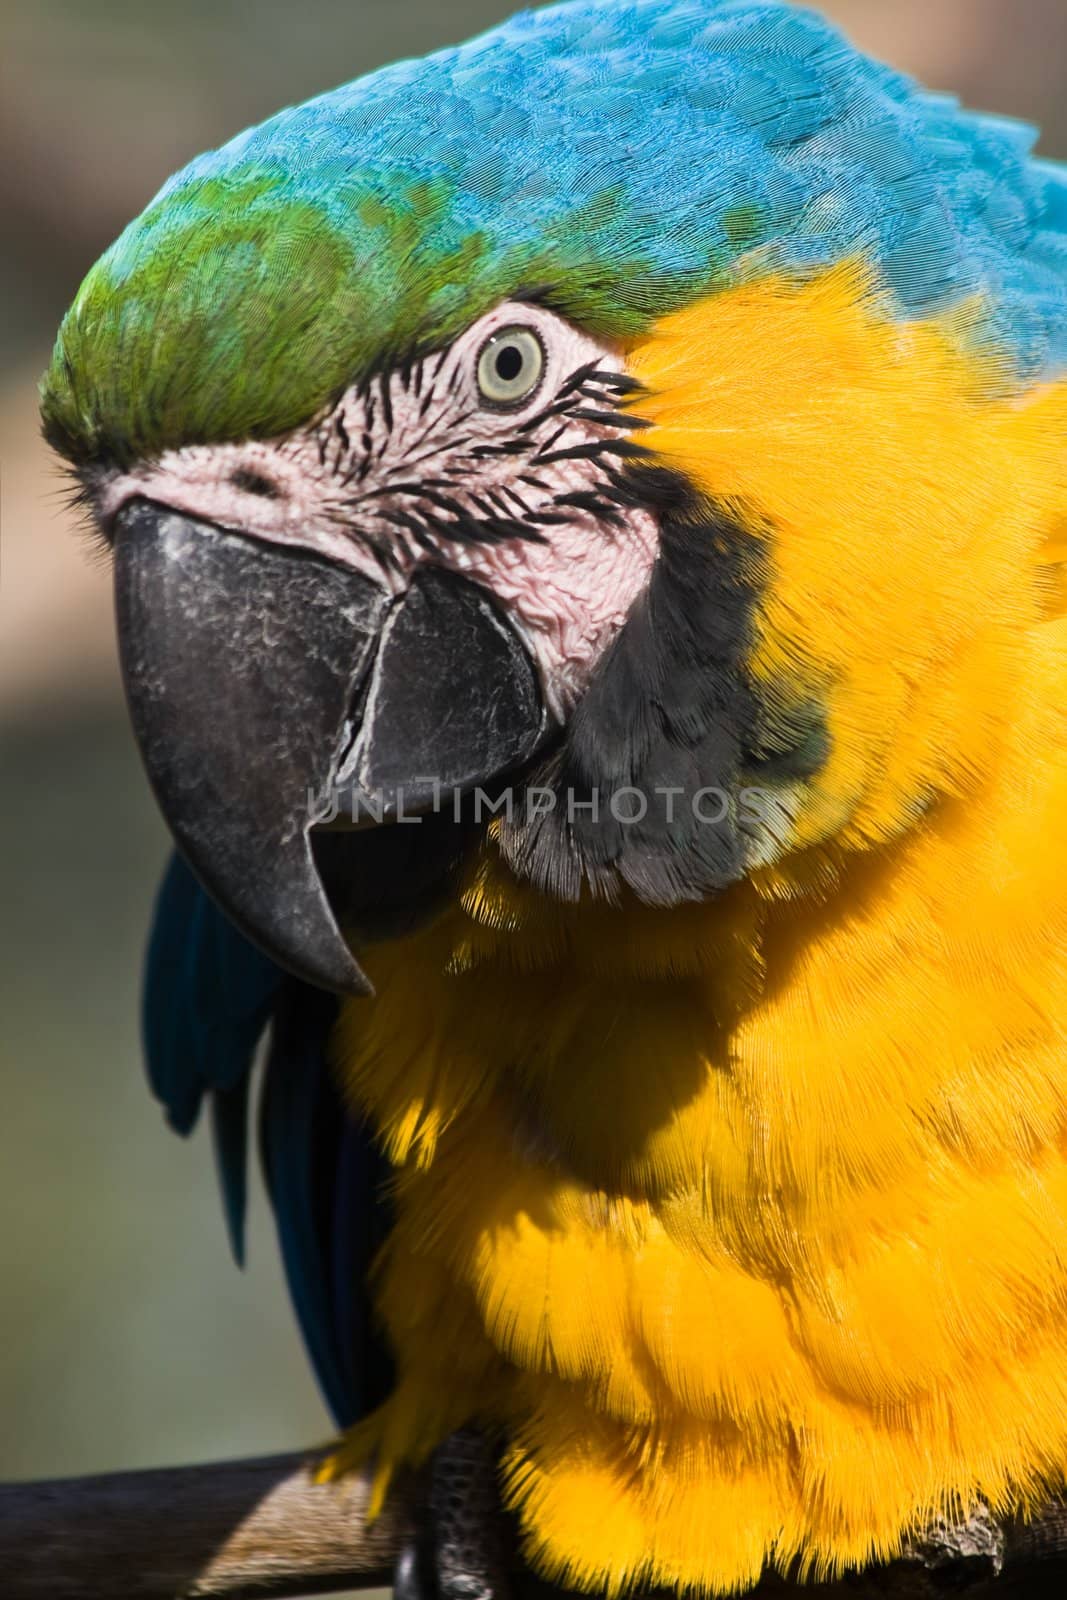 Yellow and blue parrot sitting on branch